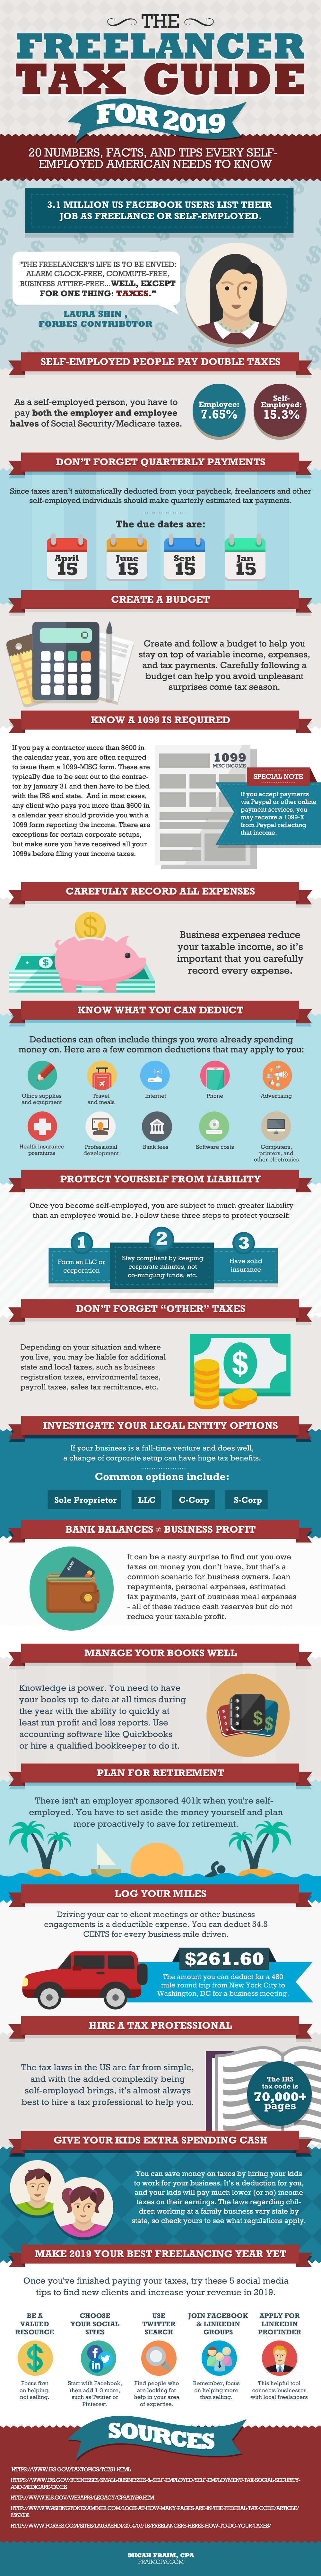 freelancer tax guide 2019 Infographic